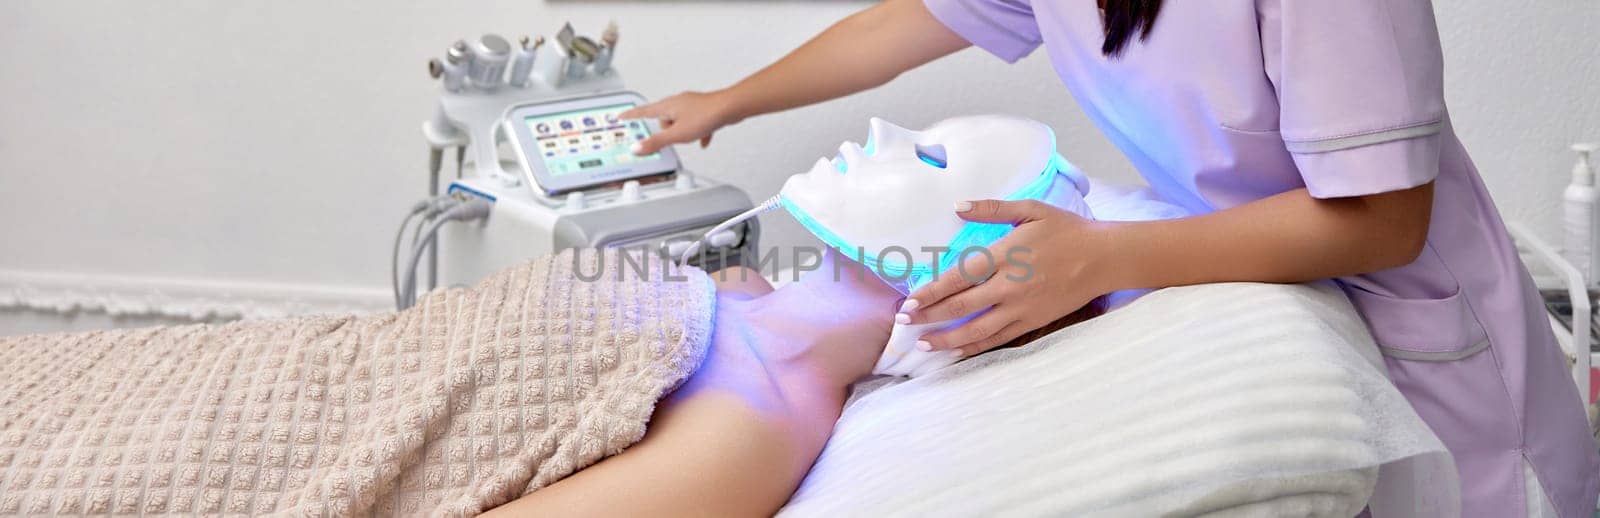 woman receiving led light therapy mask treatment from beautician by erstudio